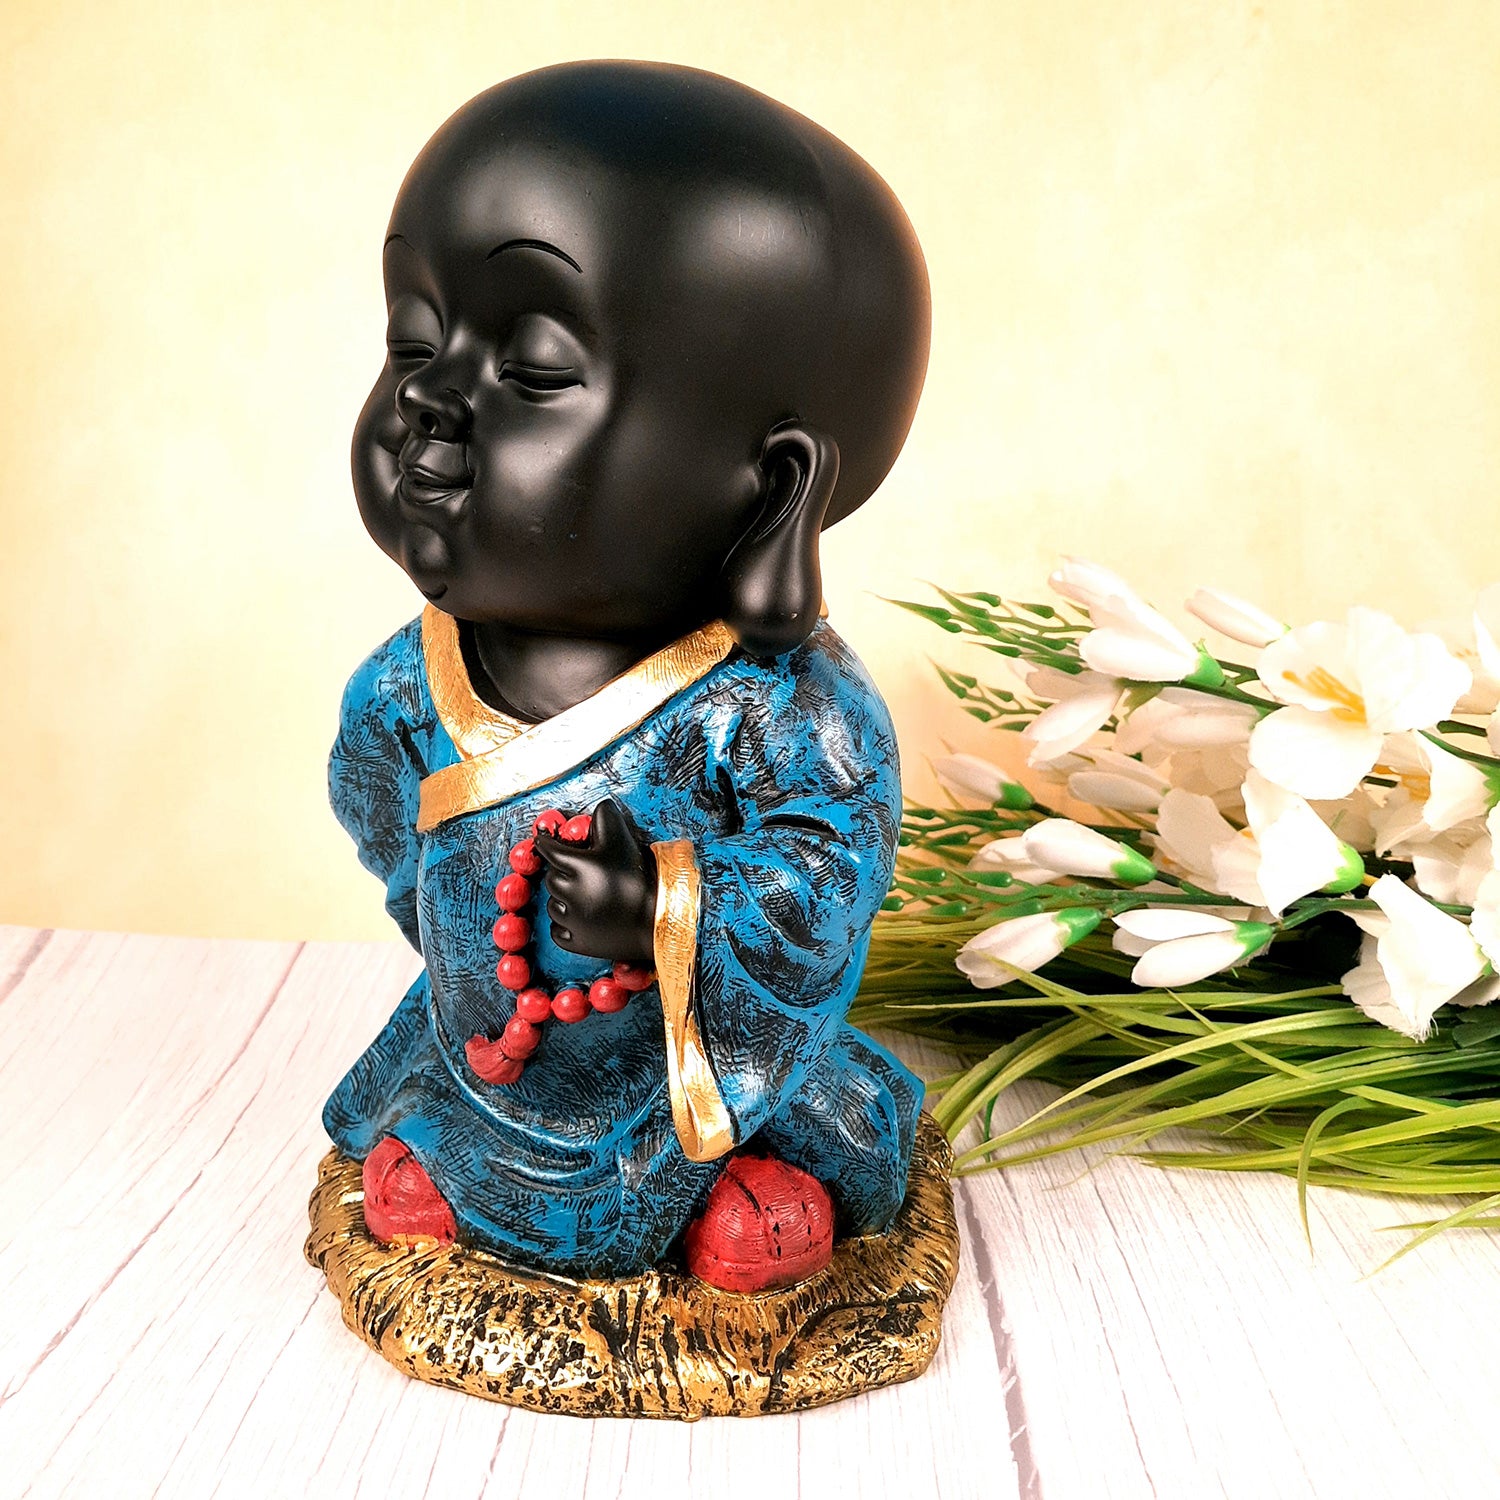 Baby Monk Showpiece with Rustic Look | Feng Shui Decor - For Good Luck, Home, Table, Office Decor & Gift - 10 Inch - apkamart